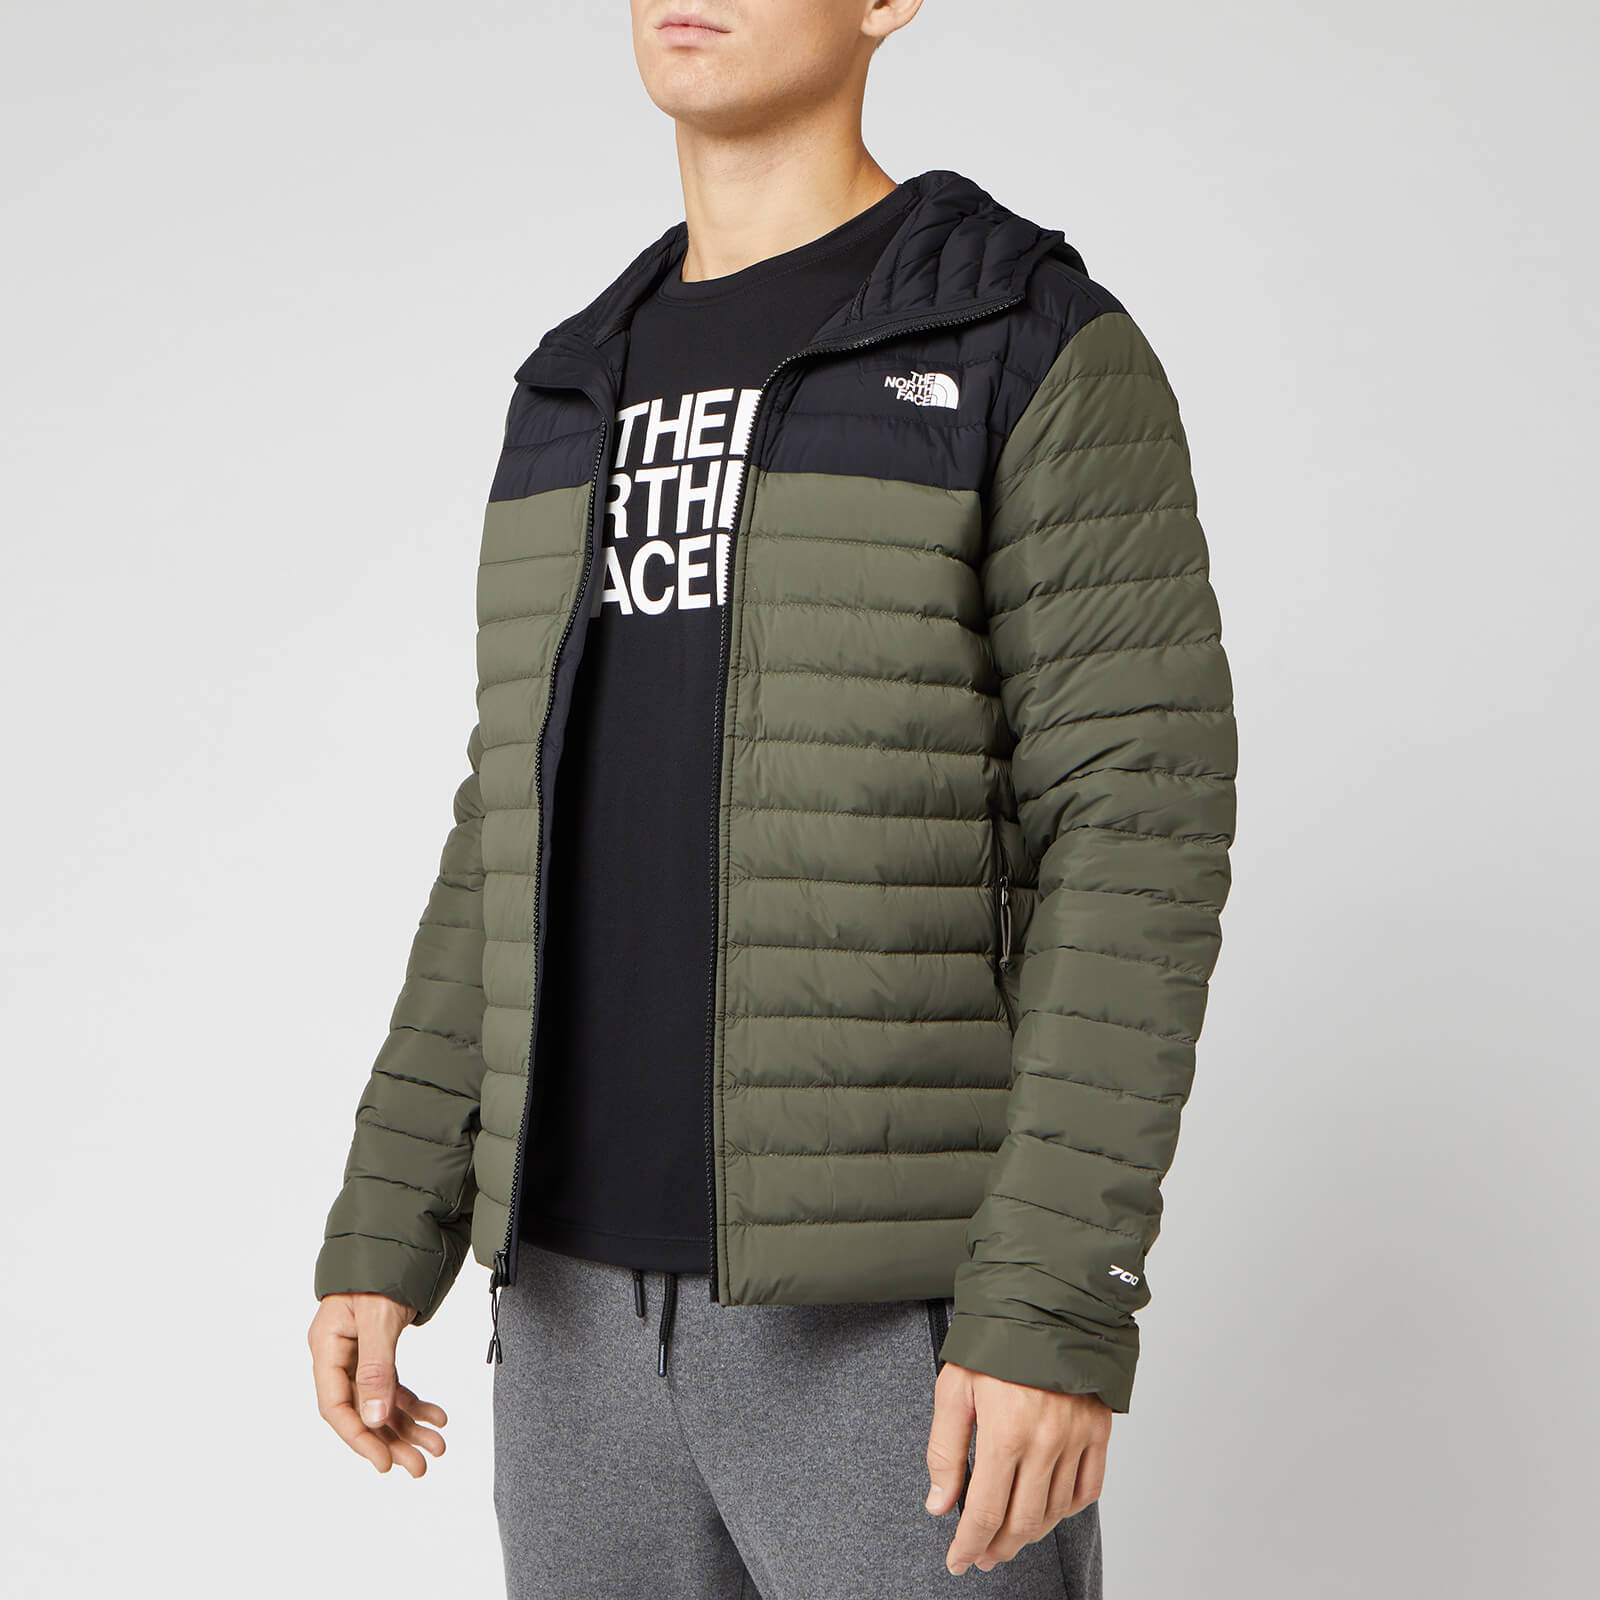 men's stretch down hoodie north face